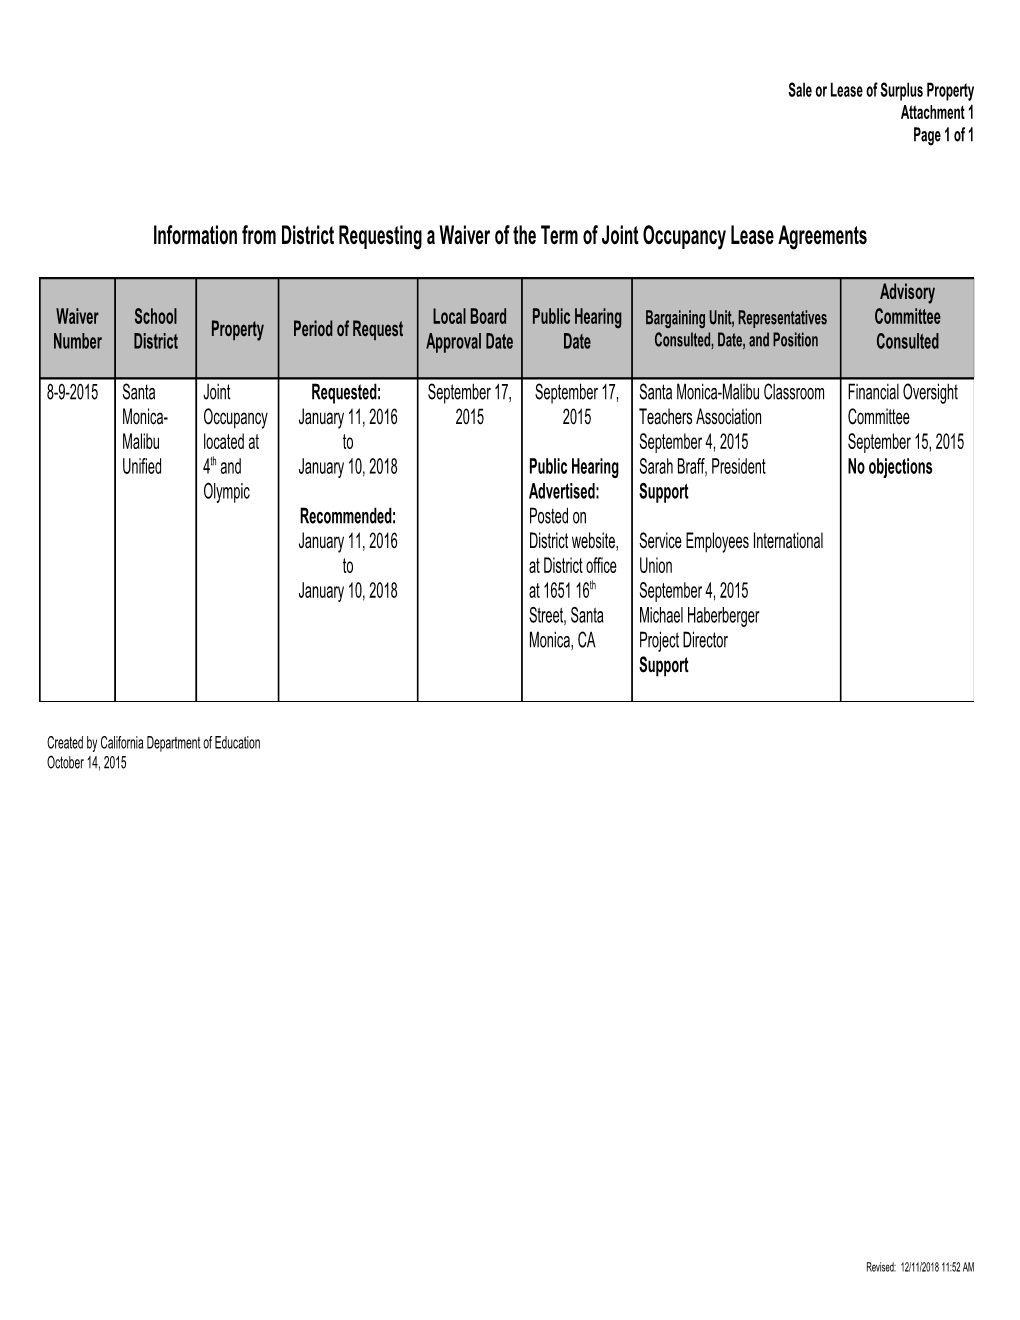 January 2016 Waiver Item W-03 - Meeting Agendas (CA State Board of Education)